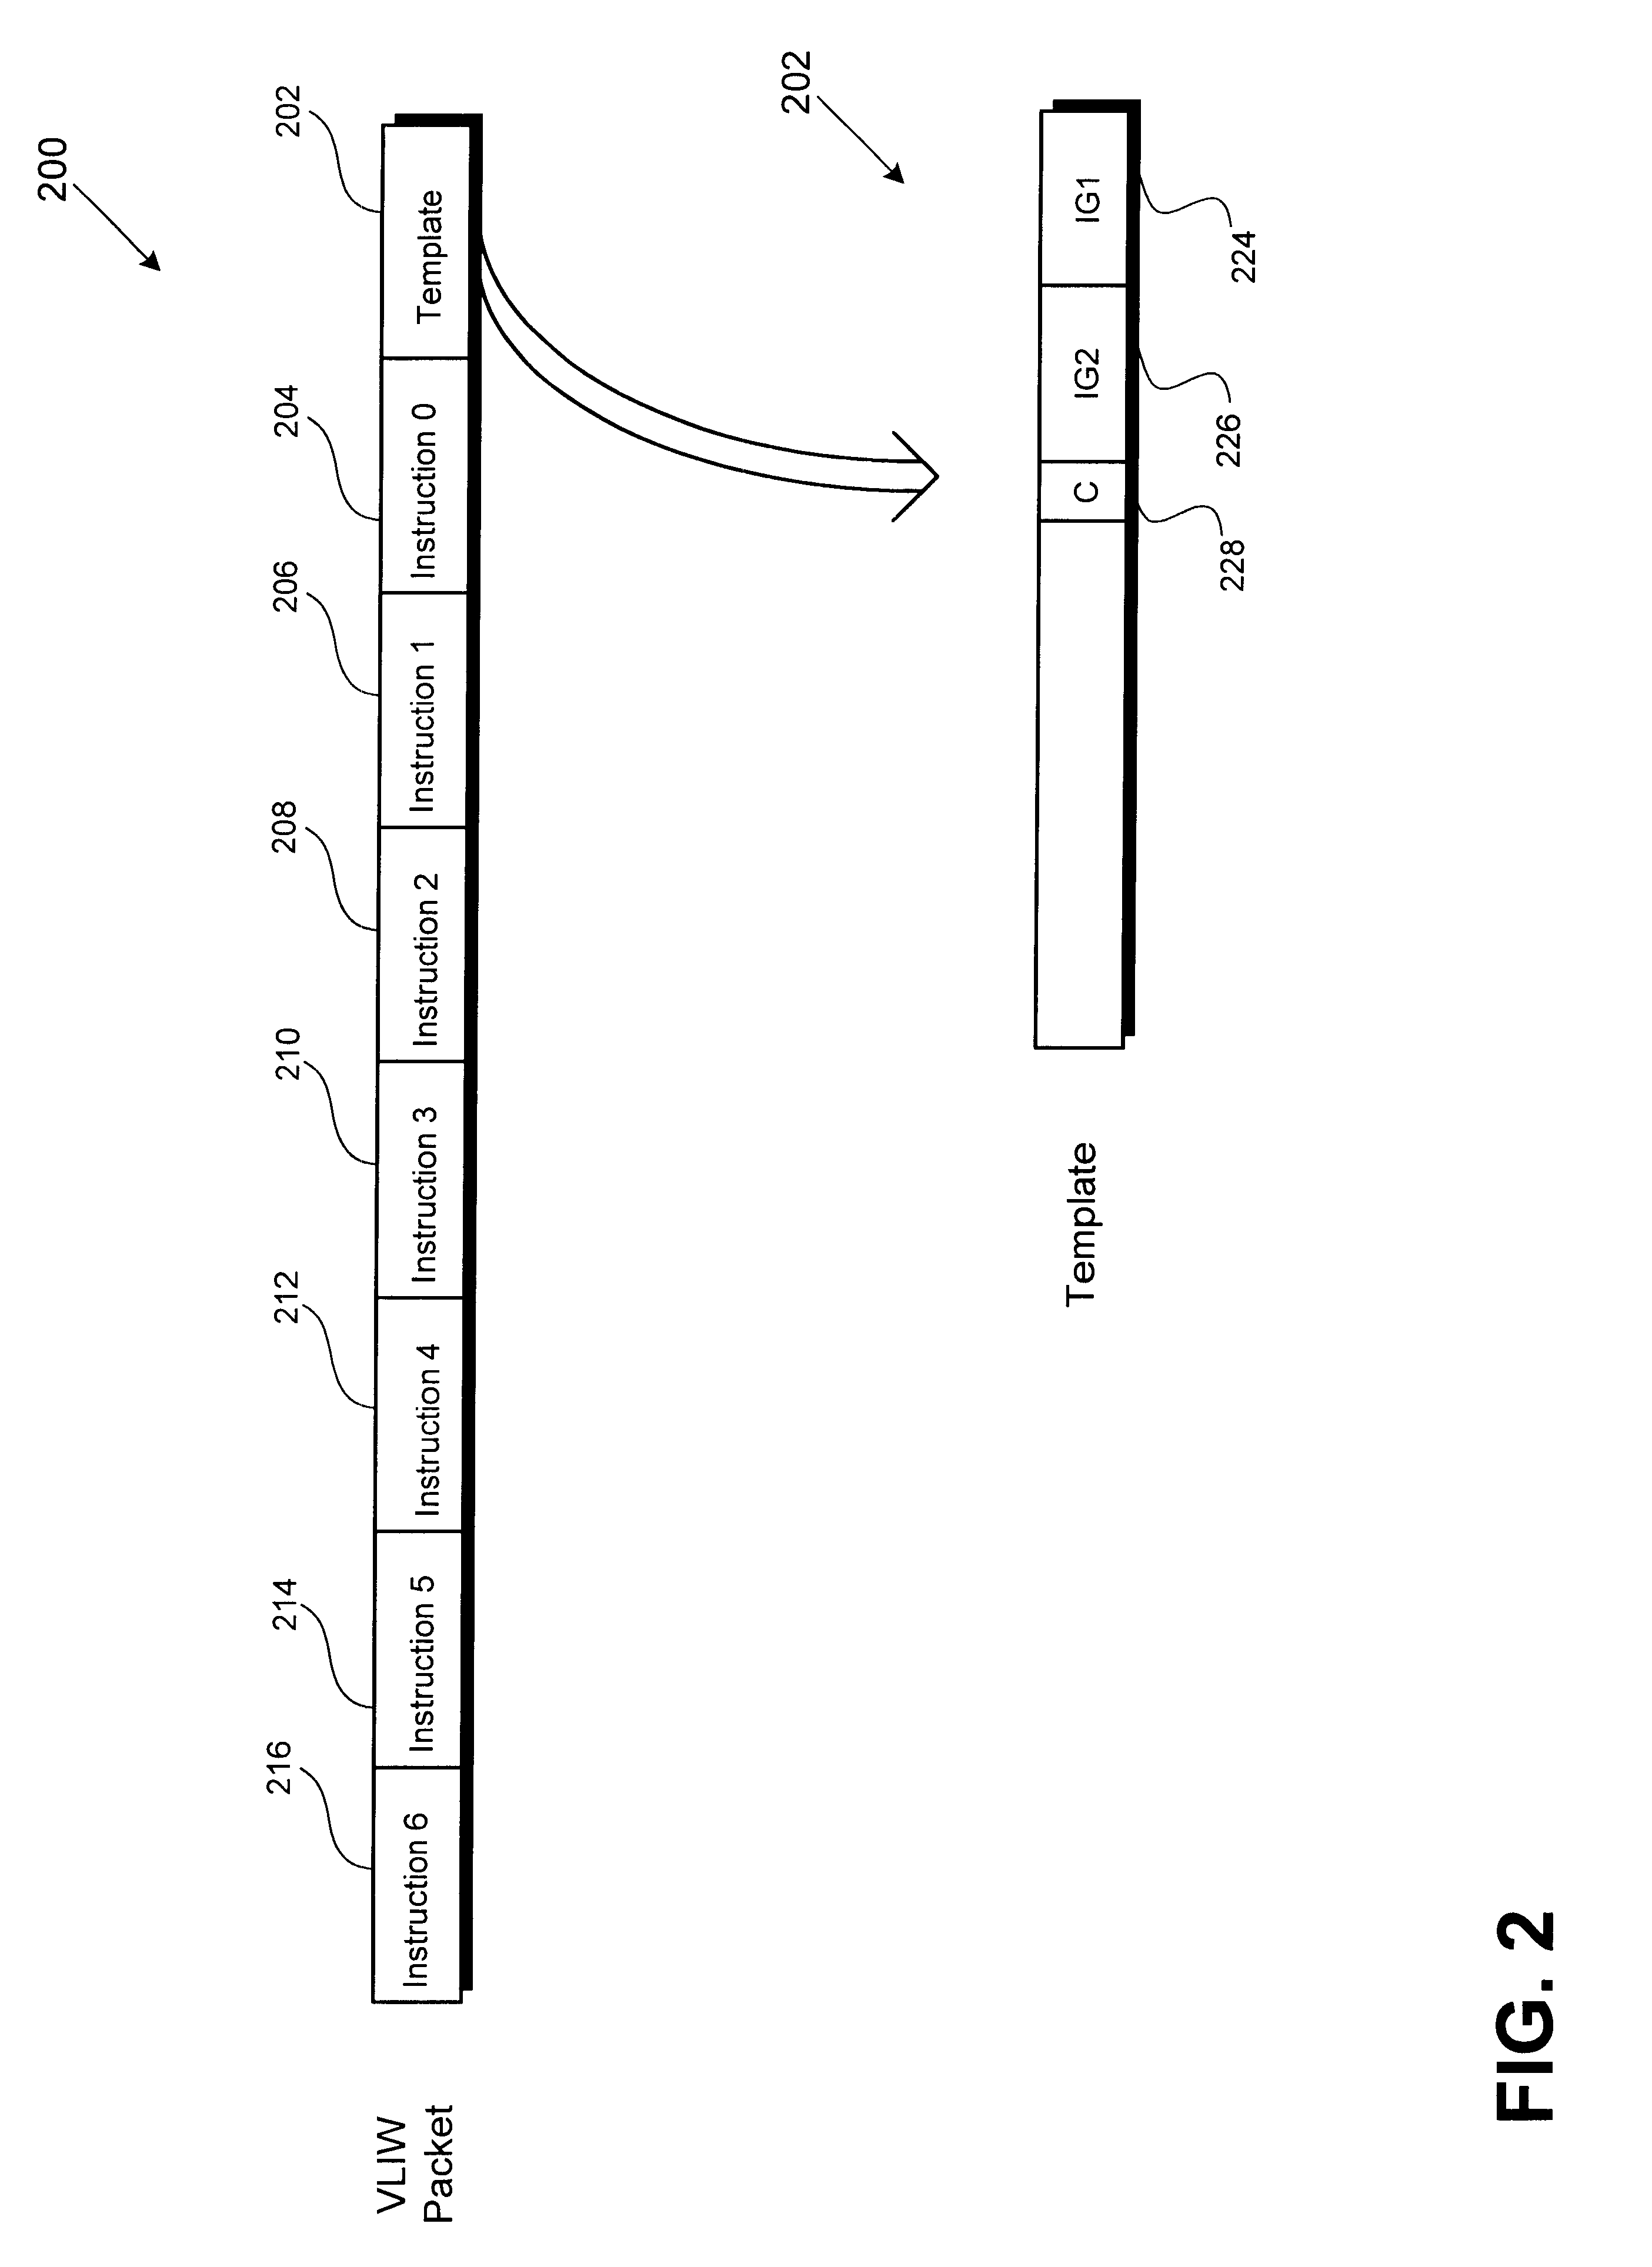 Apparatus and method for issue grouping of instructions in a VLIW processor